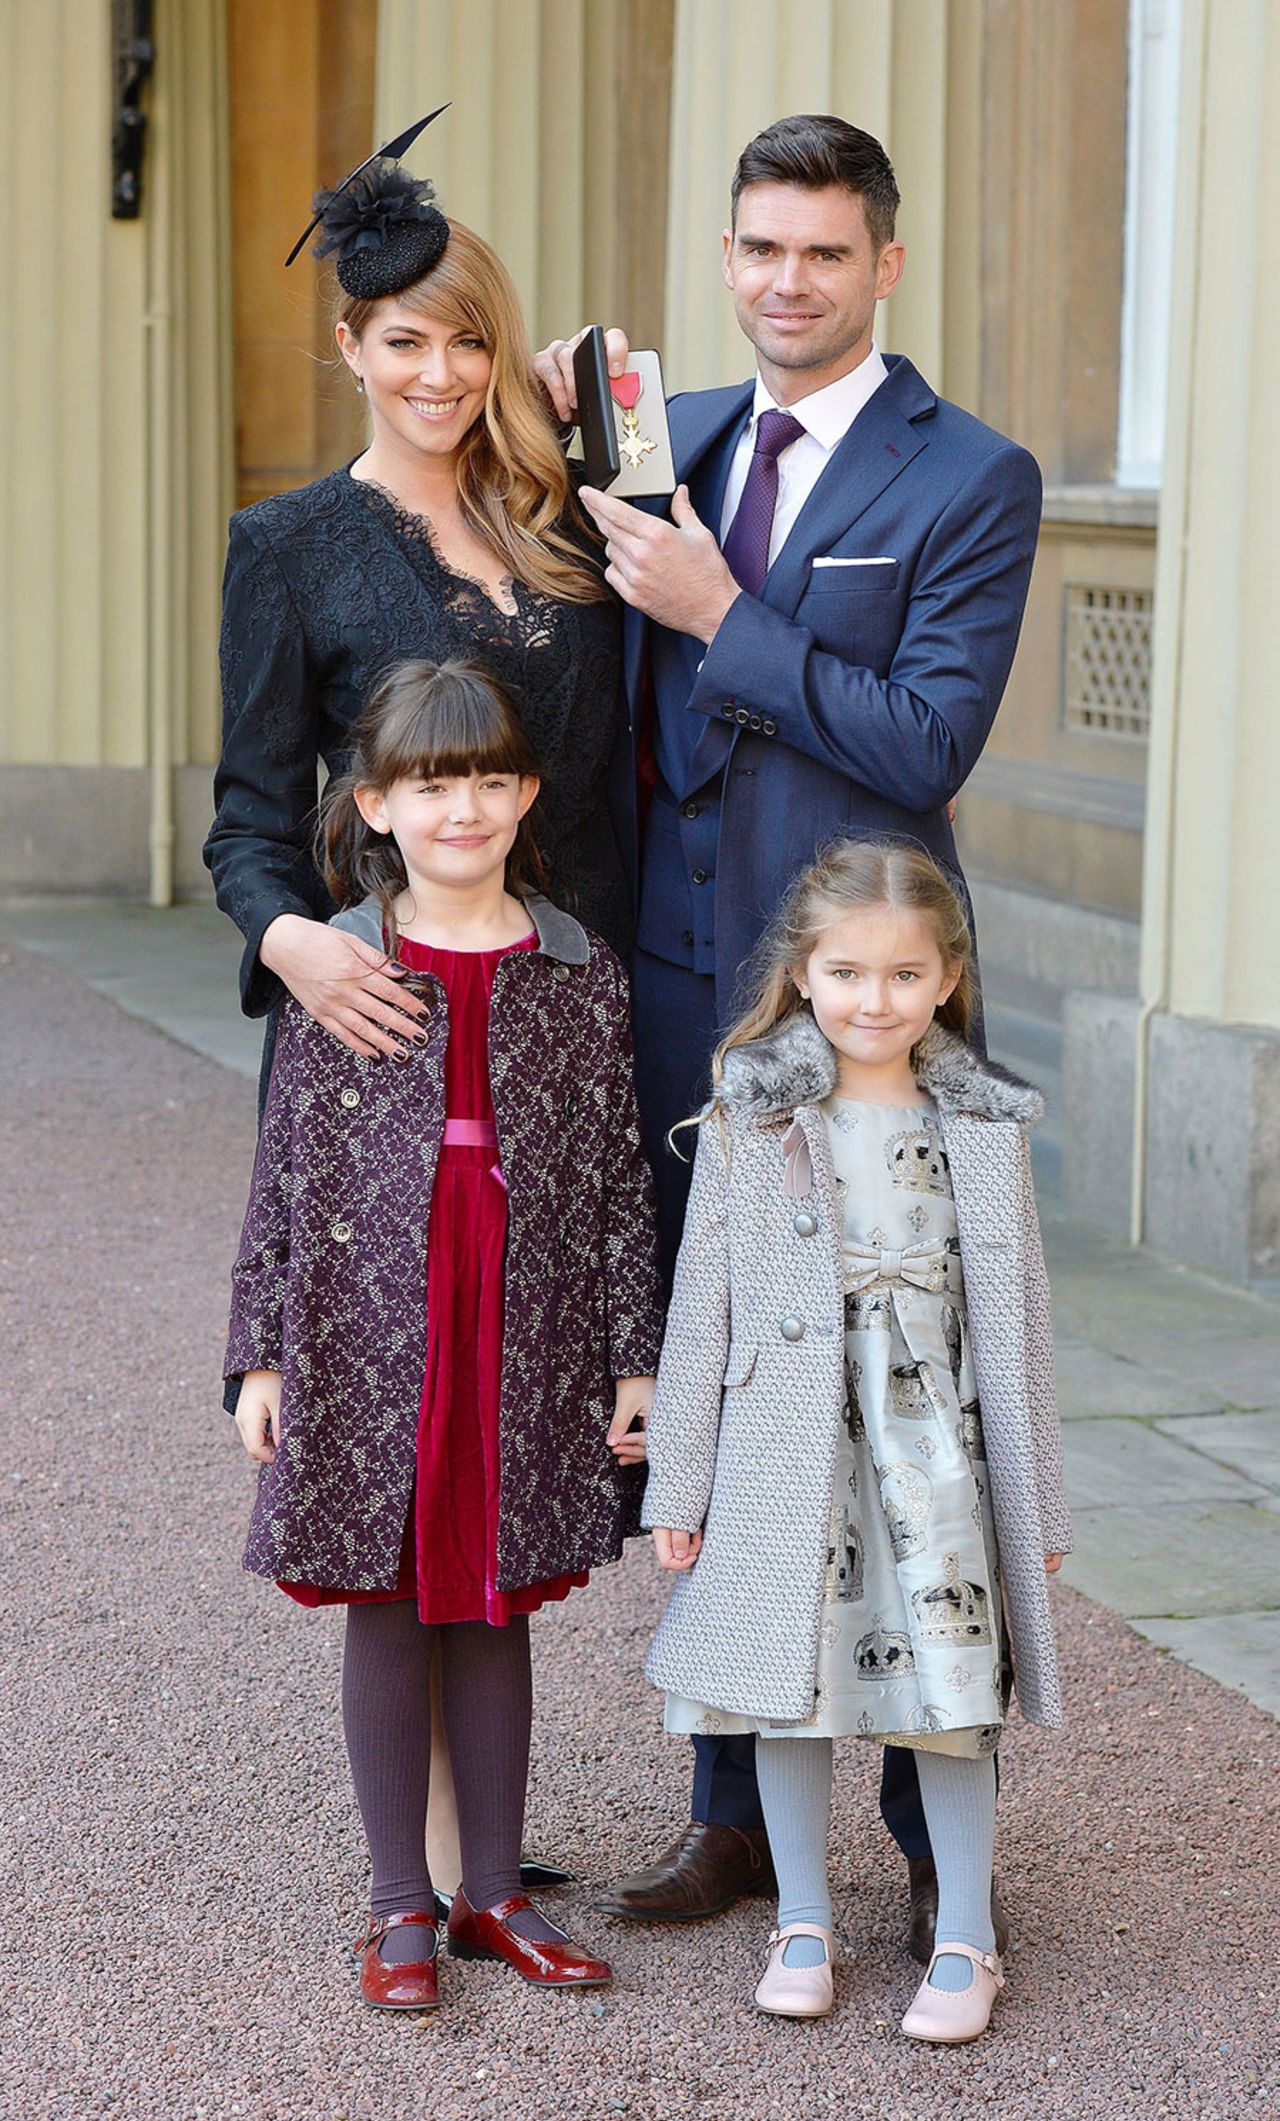 James Anderson at Buckingham Palace, with wife Danielle, and daughters Lola and Ruby, after receiving his OBE, London, February 11, 2016